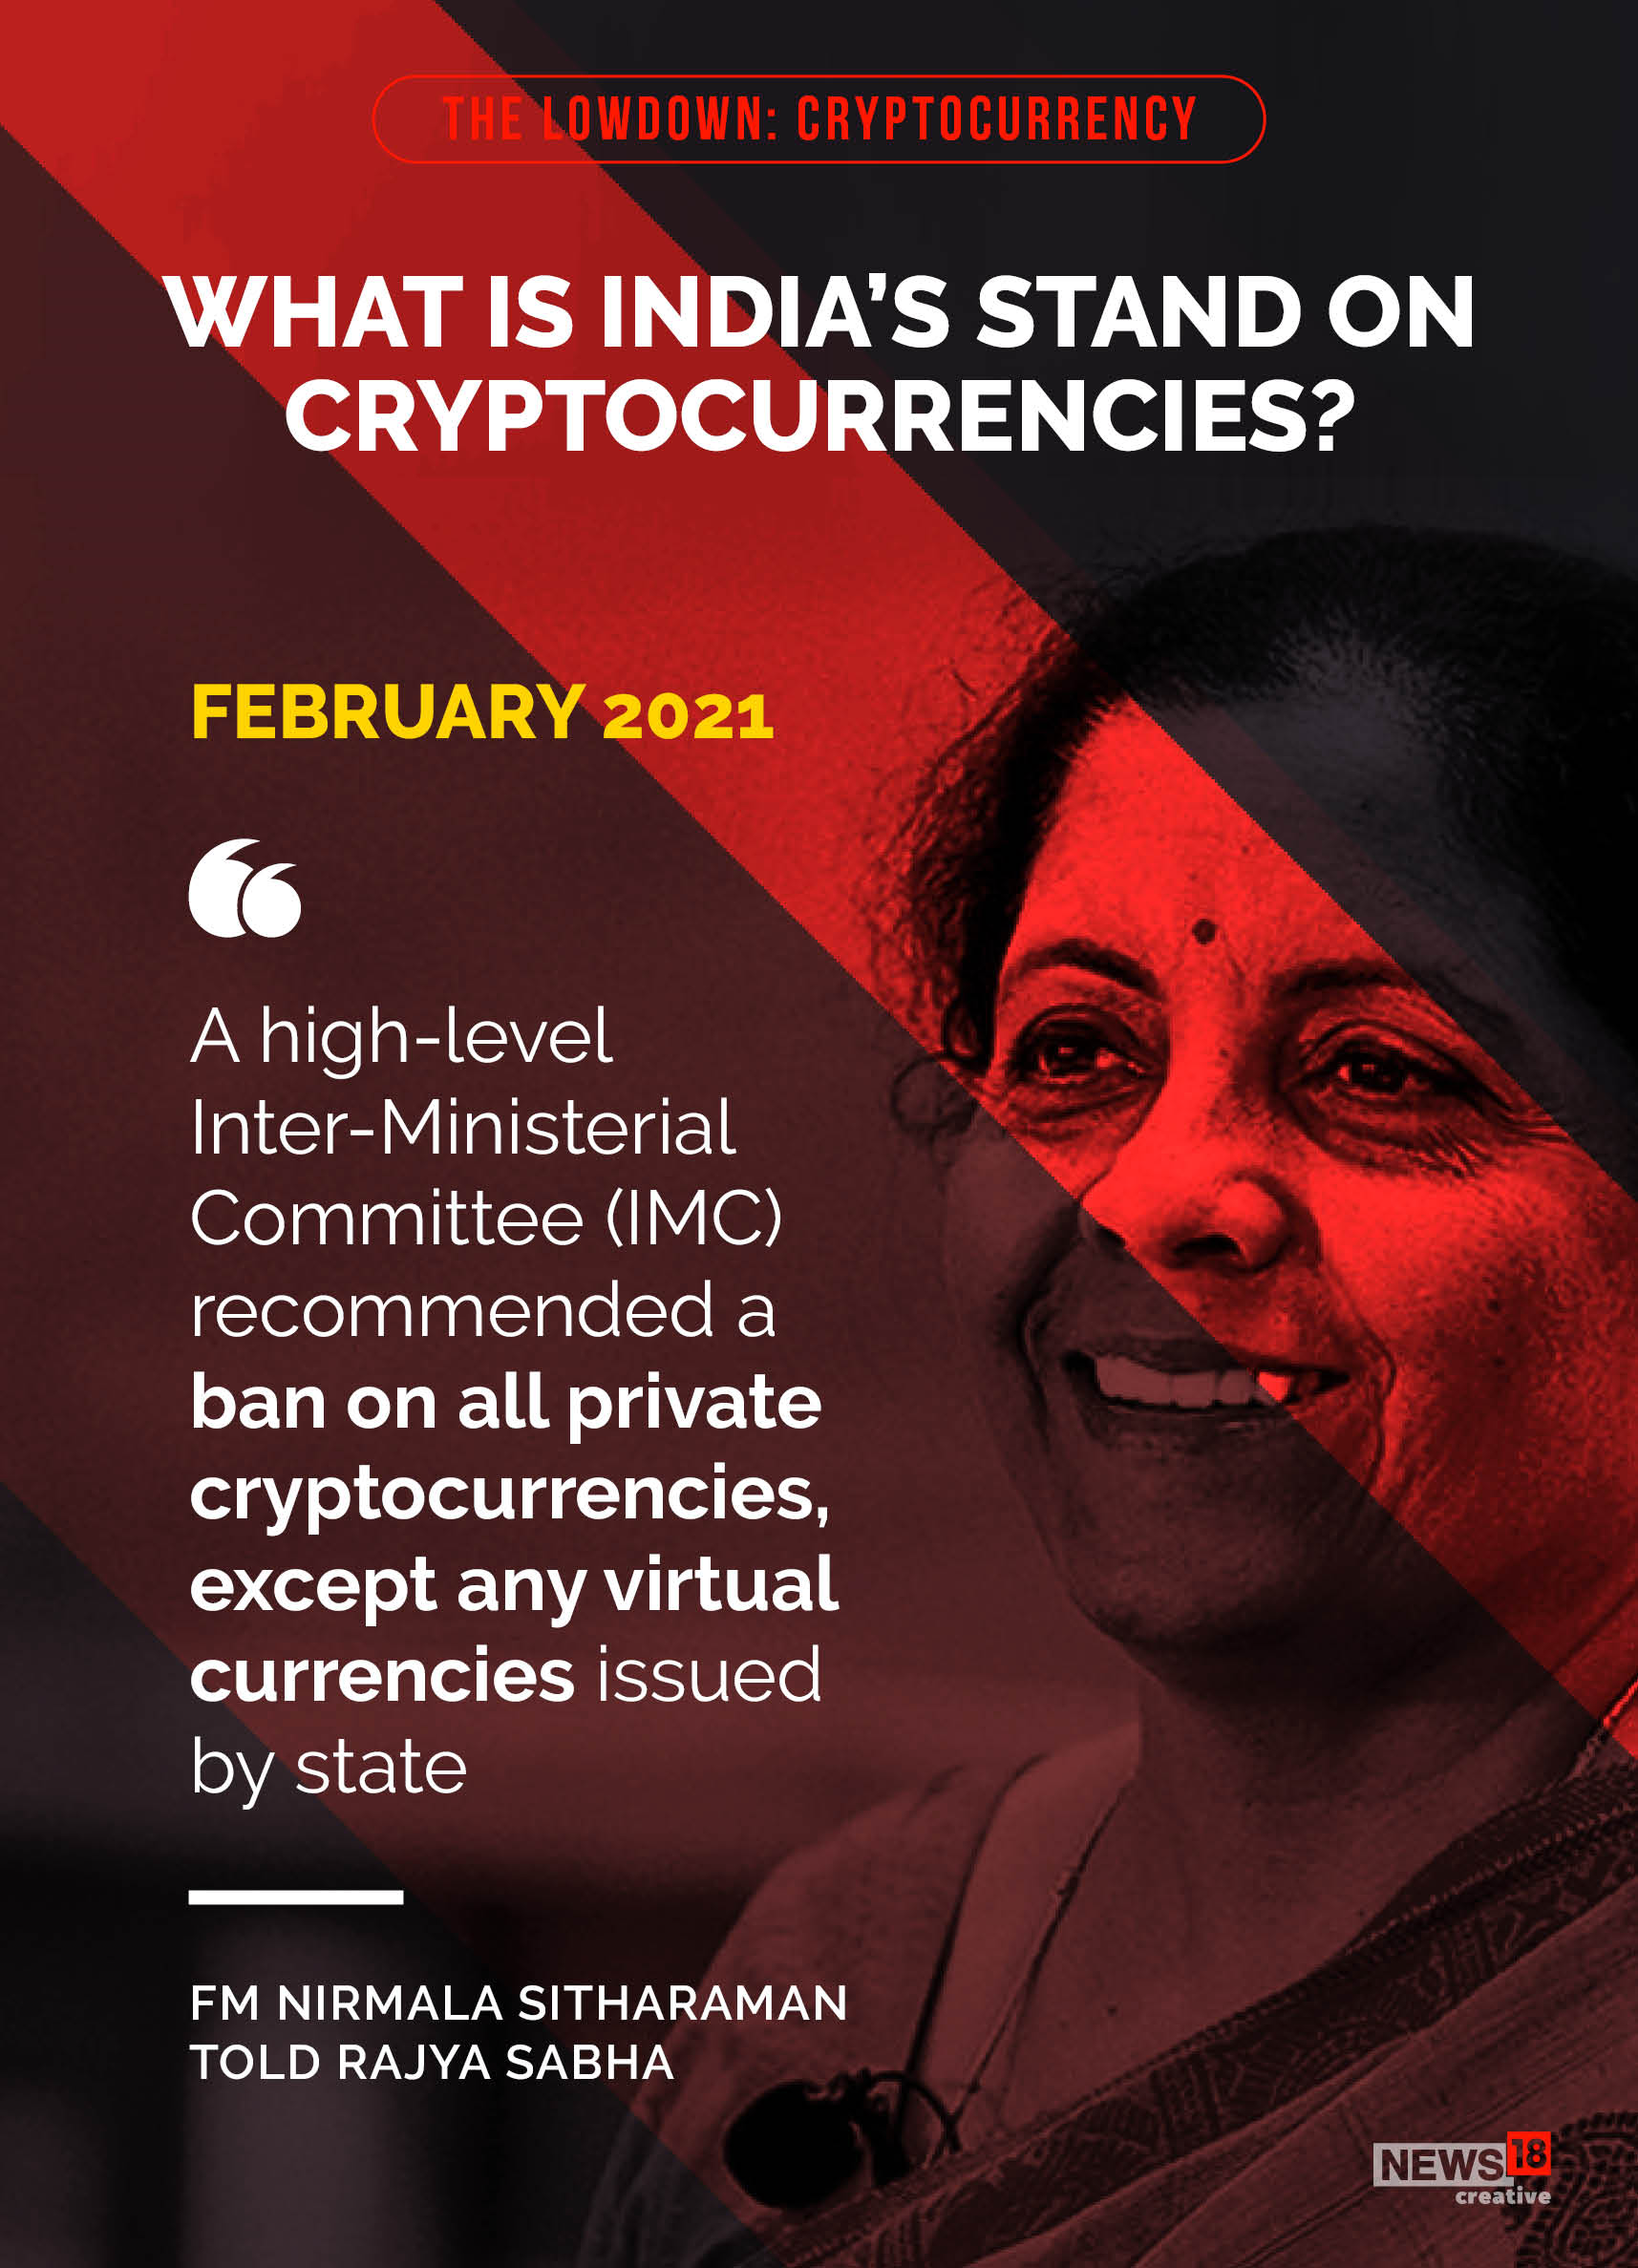 Why India wants to regulate cryptocurrency